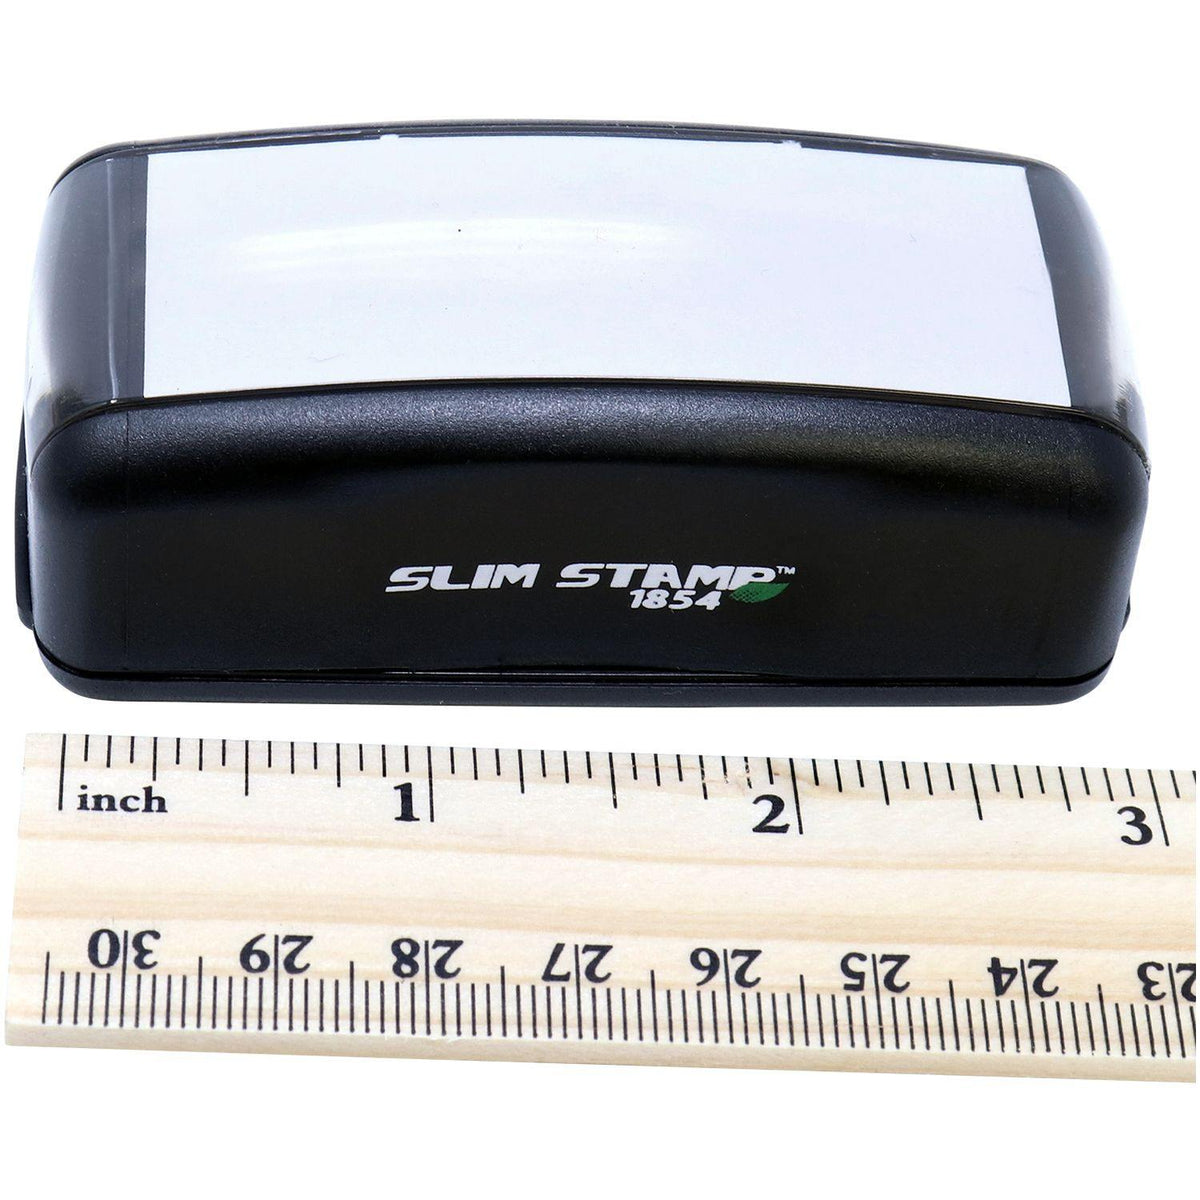 Measurement Large Pre-Inked Office Copy Stamp with Ruler